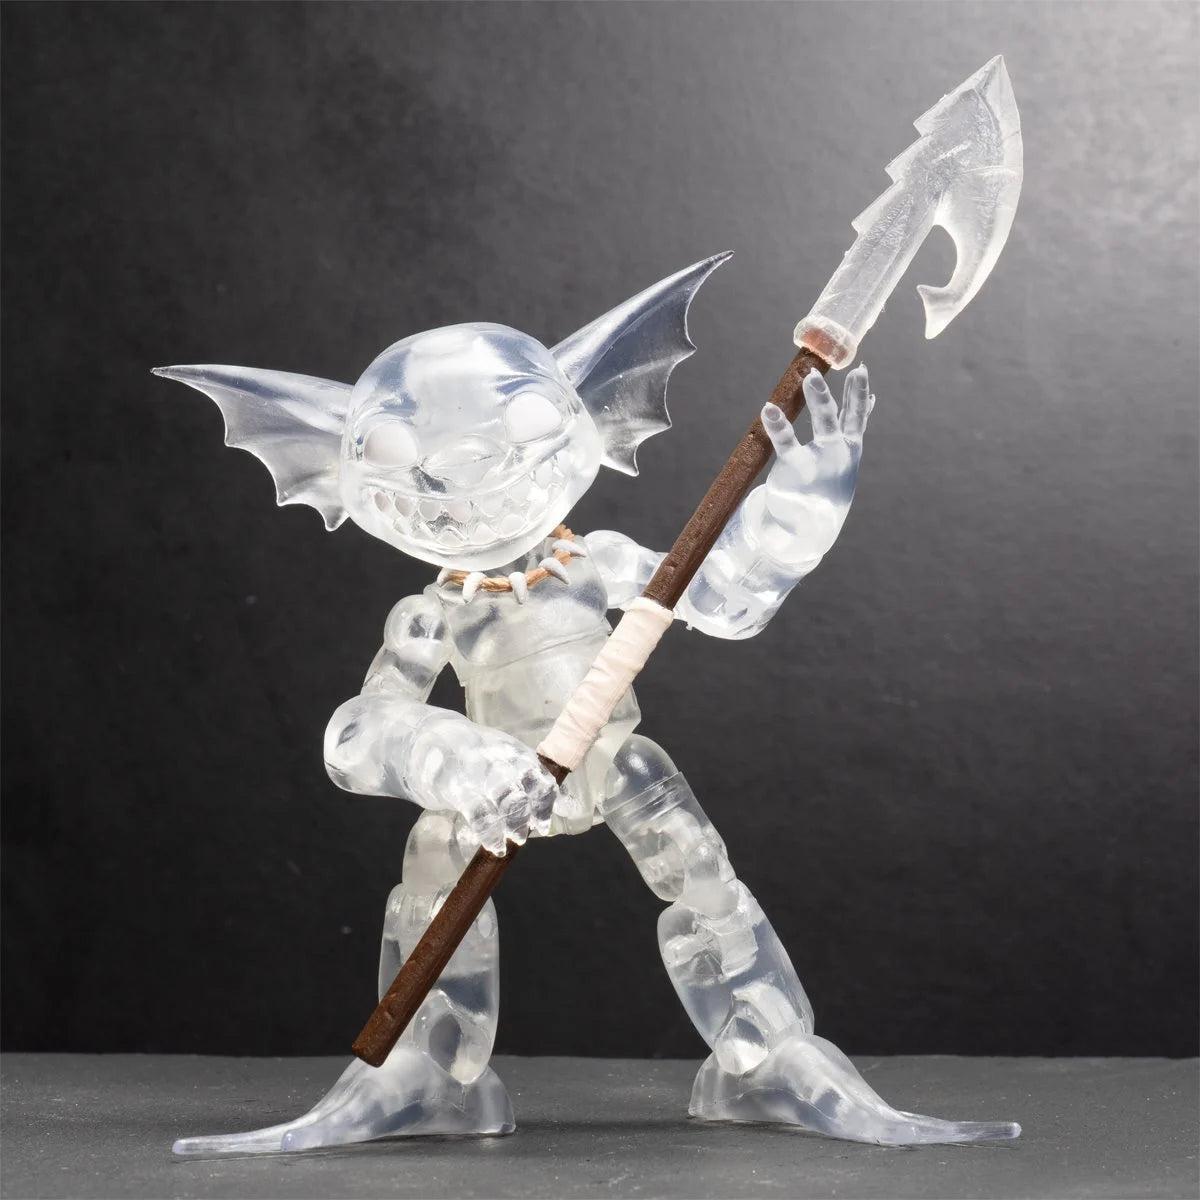 Plunderlings Drench Arctic Clear Variant 1:12 Scale Action Figure | SDCC Convention Exclusive - 0